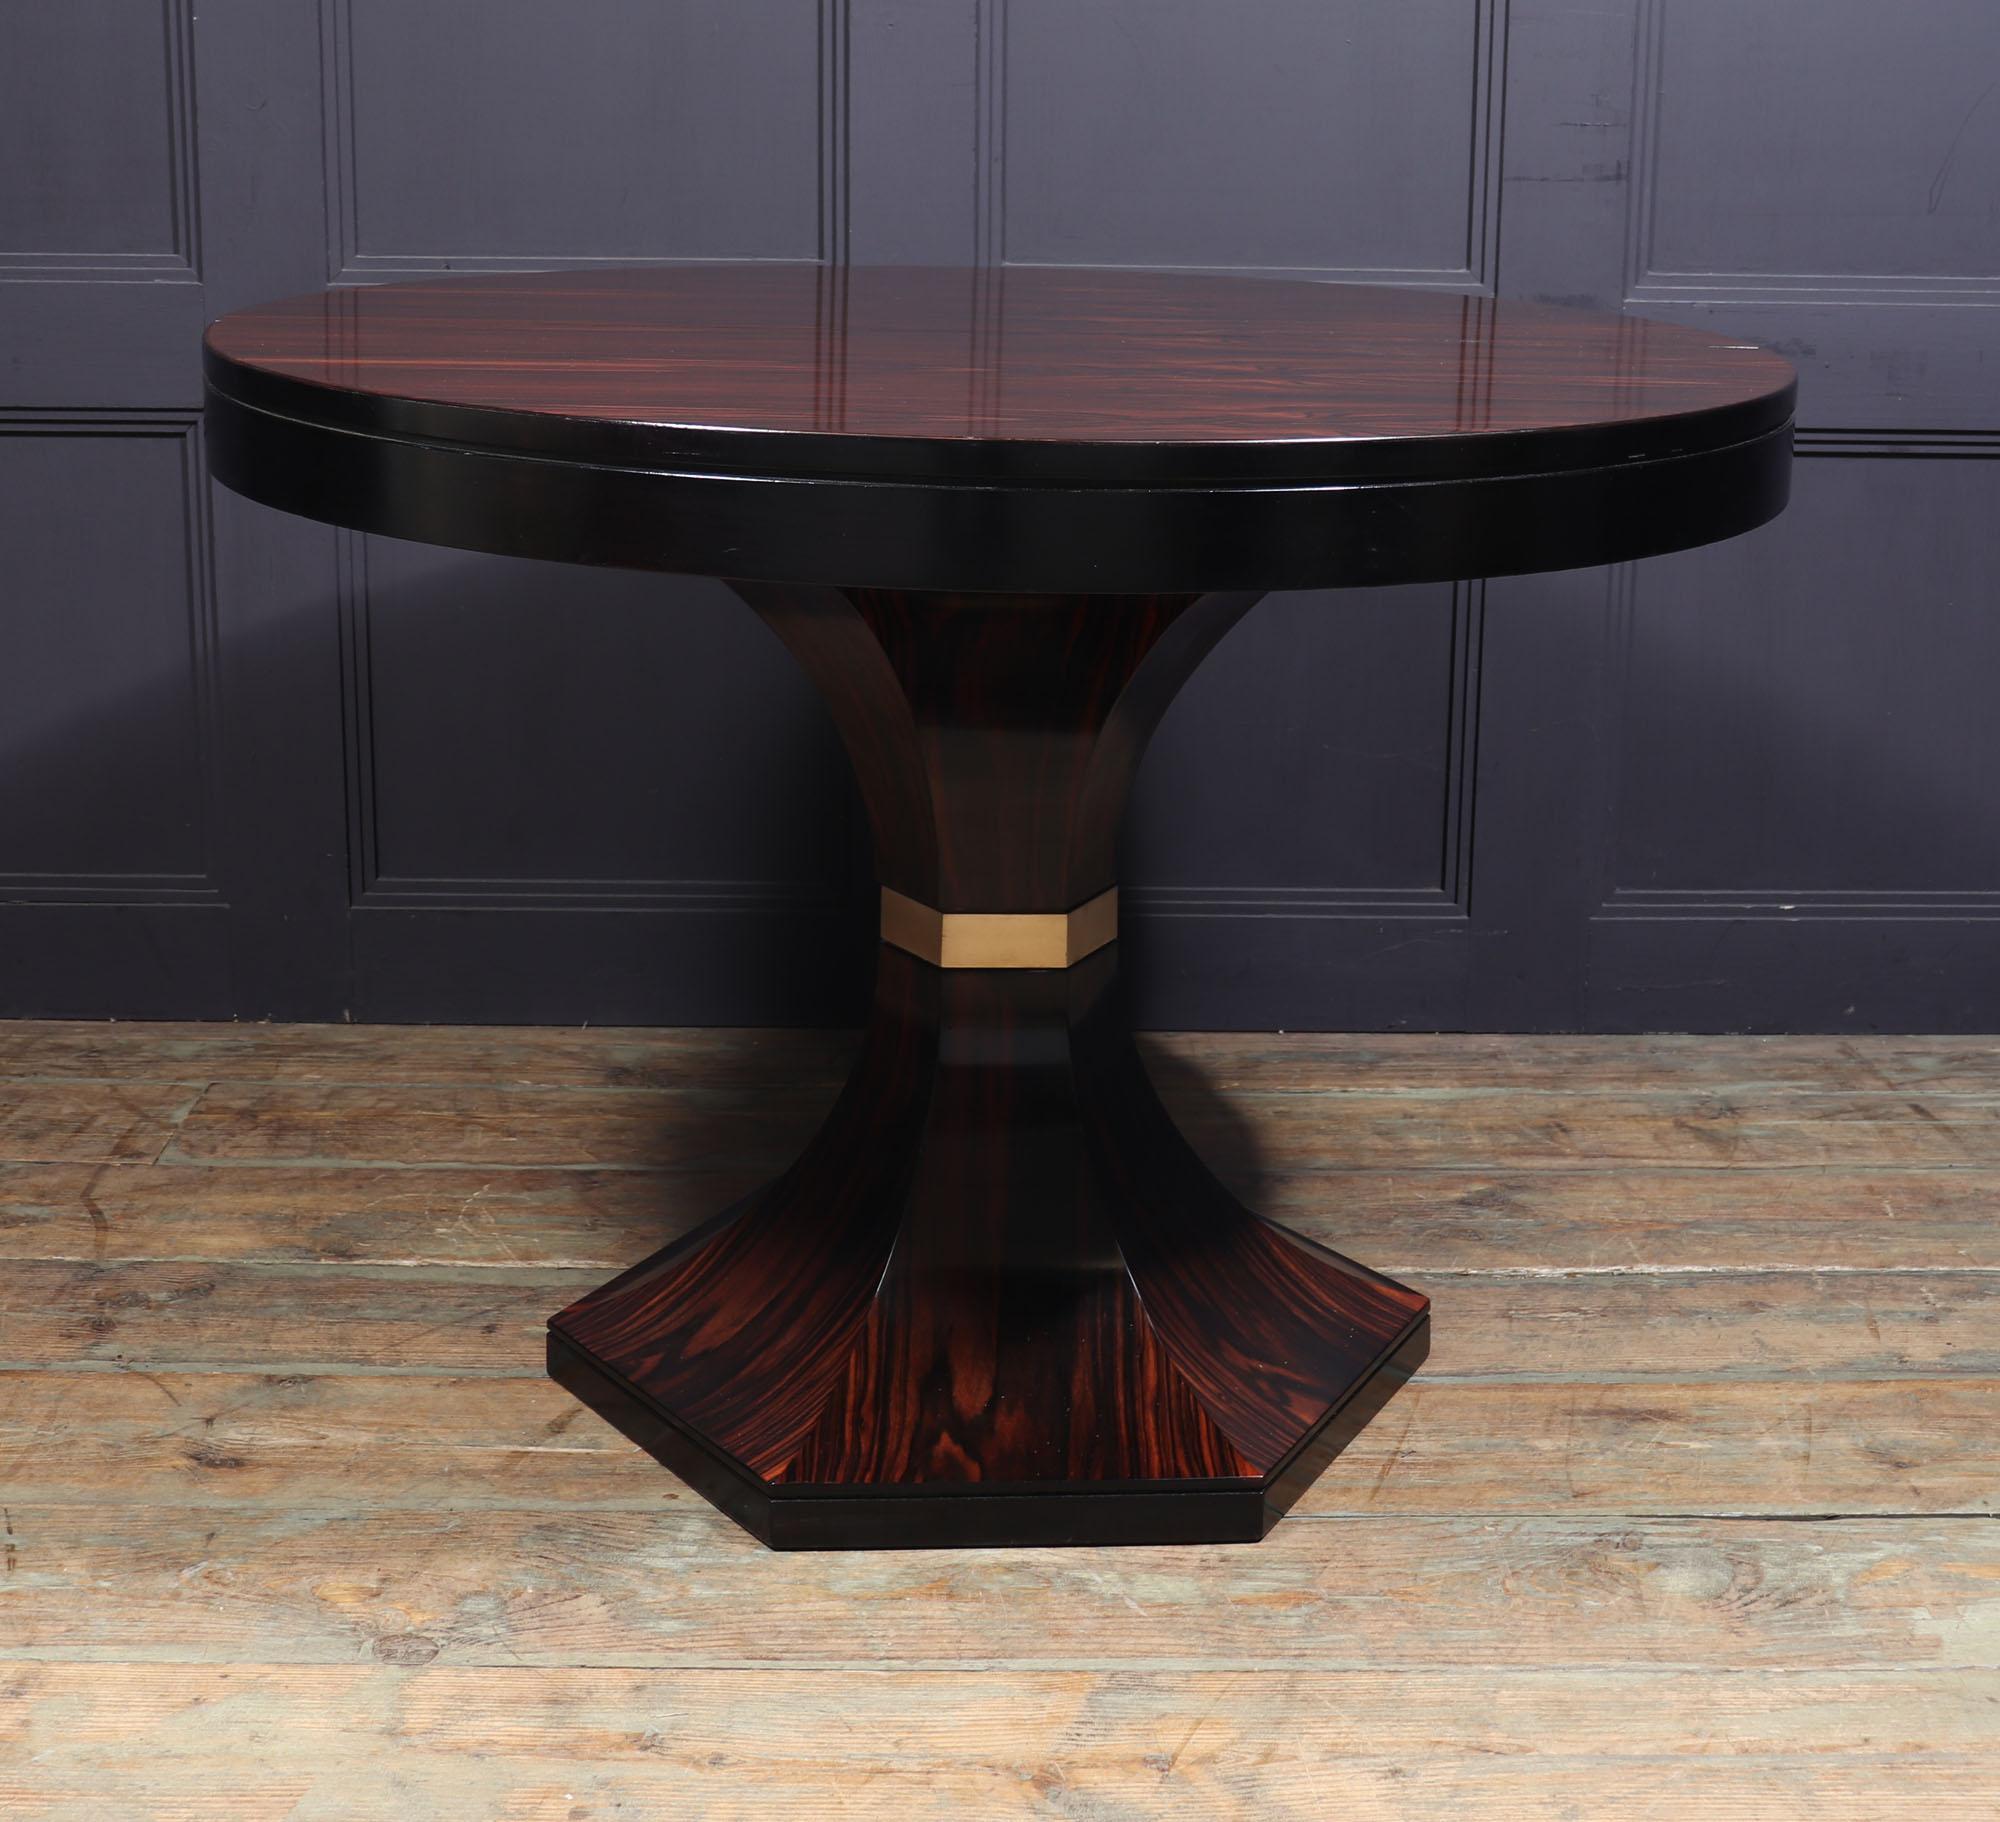 DINING TABLE BY CARLO DE CARLI
An extremely rare Macassar ebony extending table by Italian designer Carlo de Carli, extending top to accommodate a single butterfly leaf that stores inside the top, this sits on a hexagonal trumpet base with brass